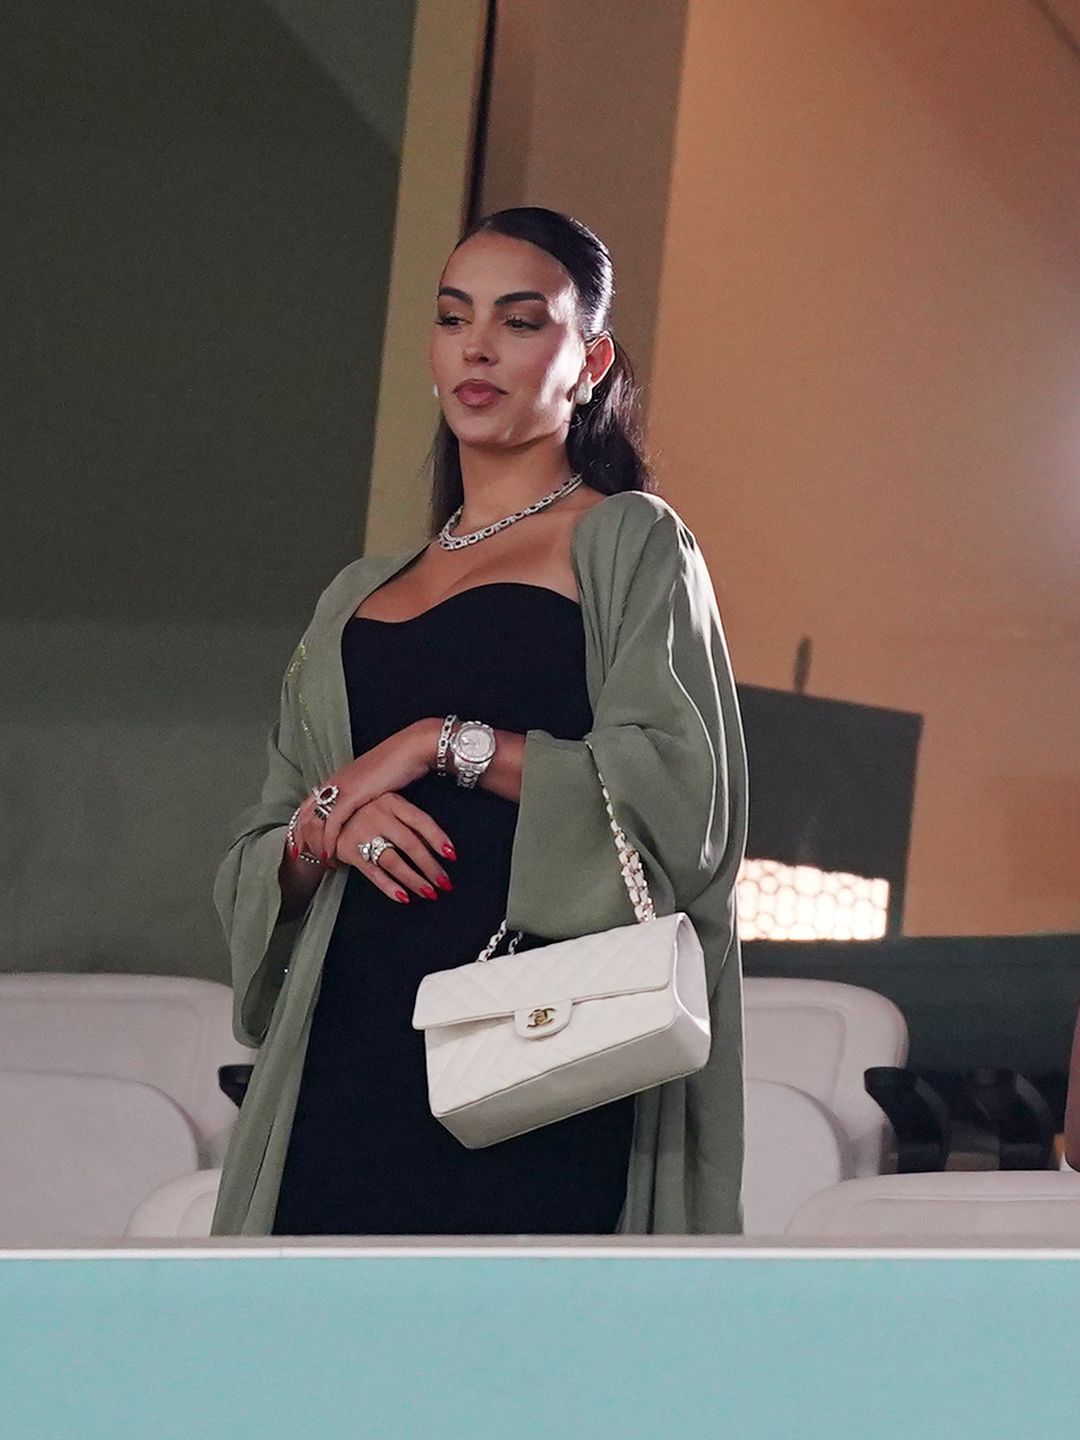 Cristiano Ronaldo's girlfriend Georgina Rodriguez in the stands before the FIFA World Cup Round of Sixteen match at the Lusail Stadium in Lusail, Qatar wearing a black dress, green coat and white chanel bag